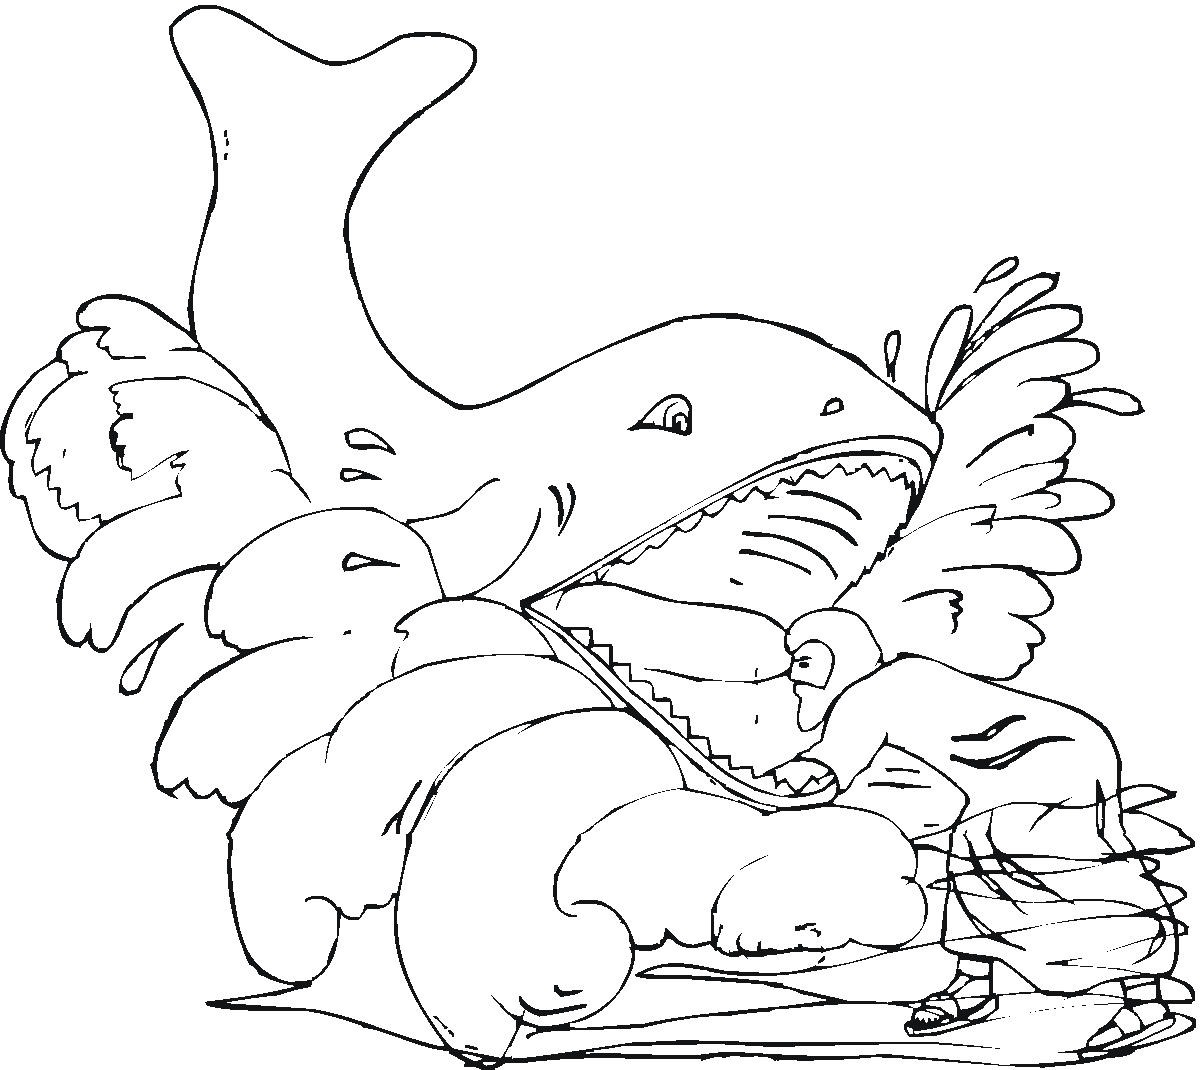 Coloring Whales For Kids Coloring Pages